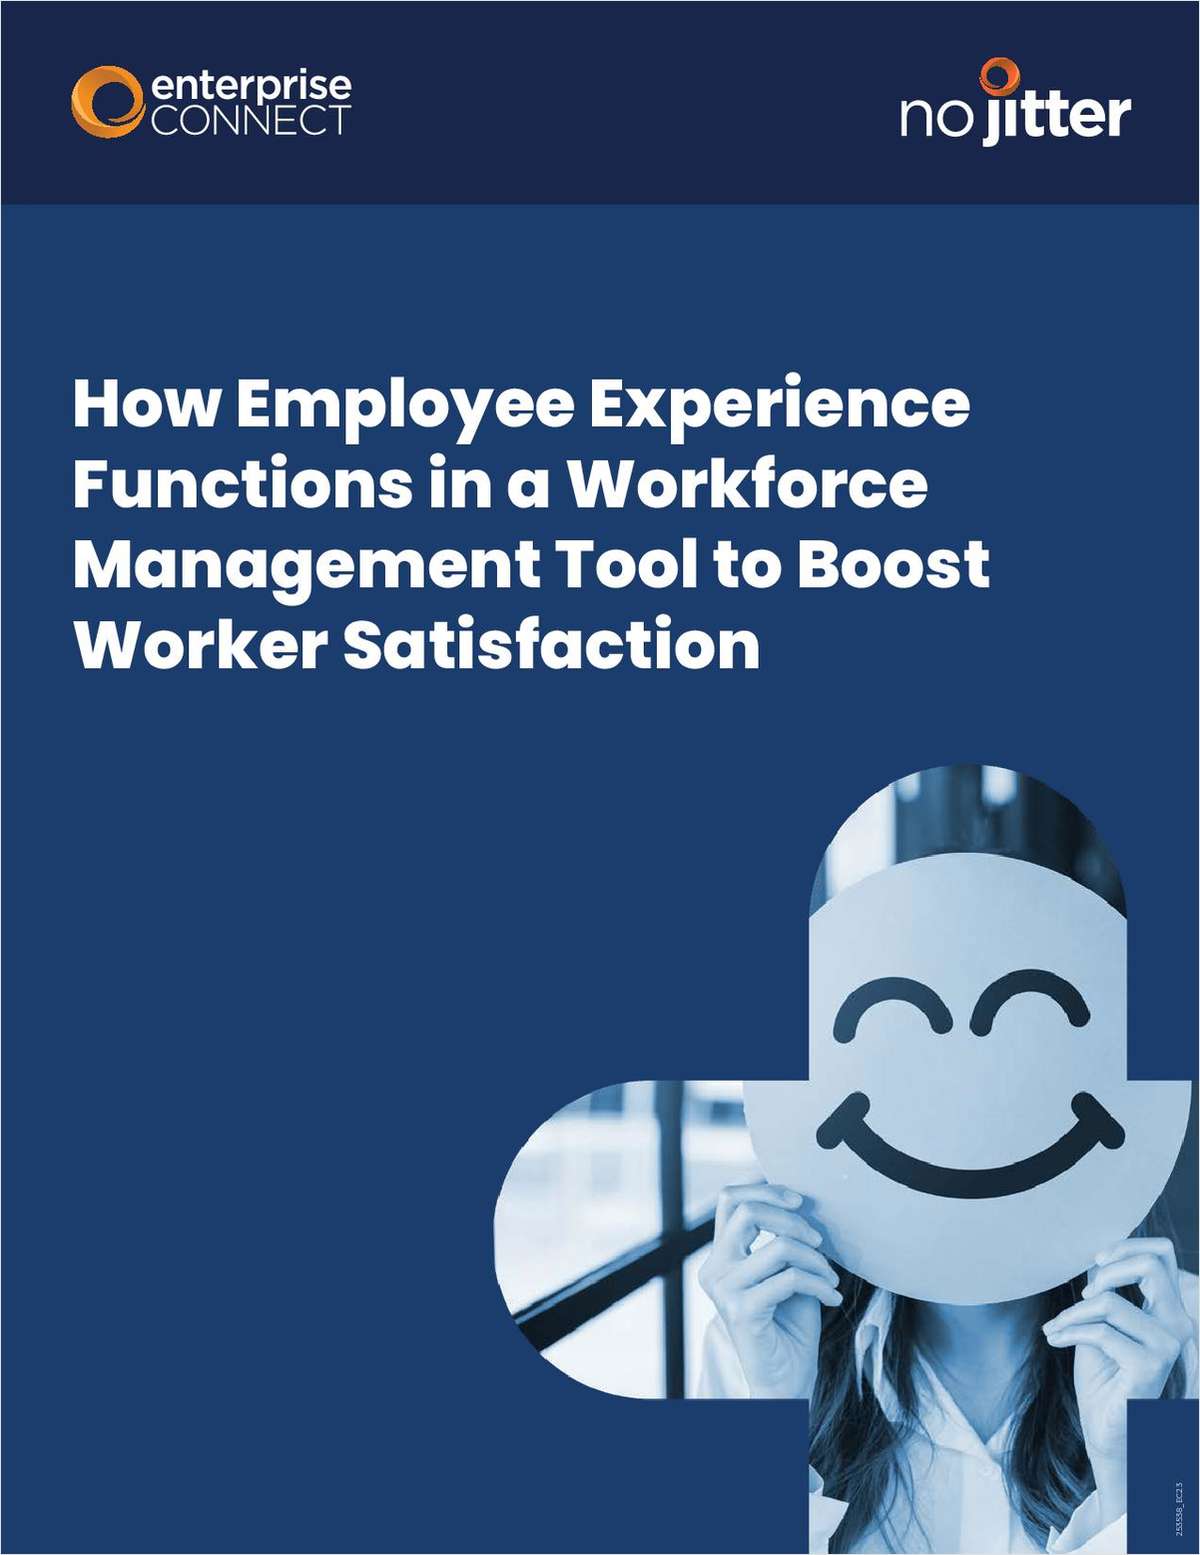 w noji68c8 - How Employee Experience Functions in a Workforce Management Tool to Boost Worker Satisfaction